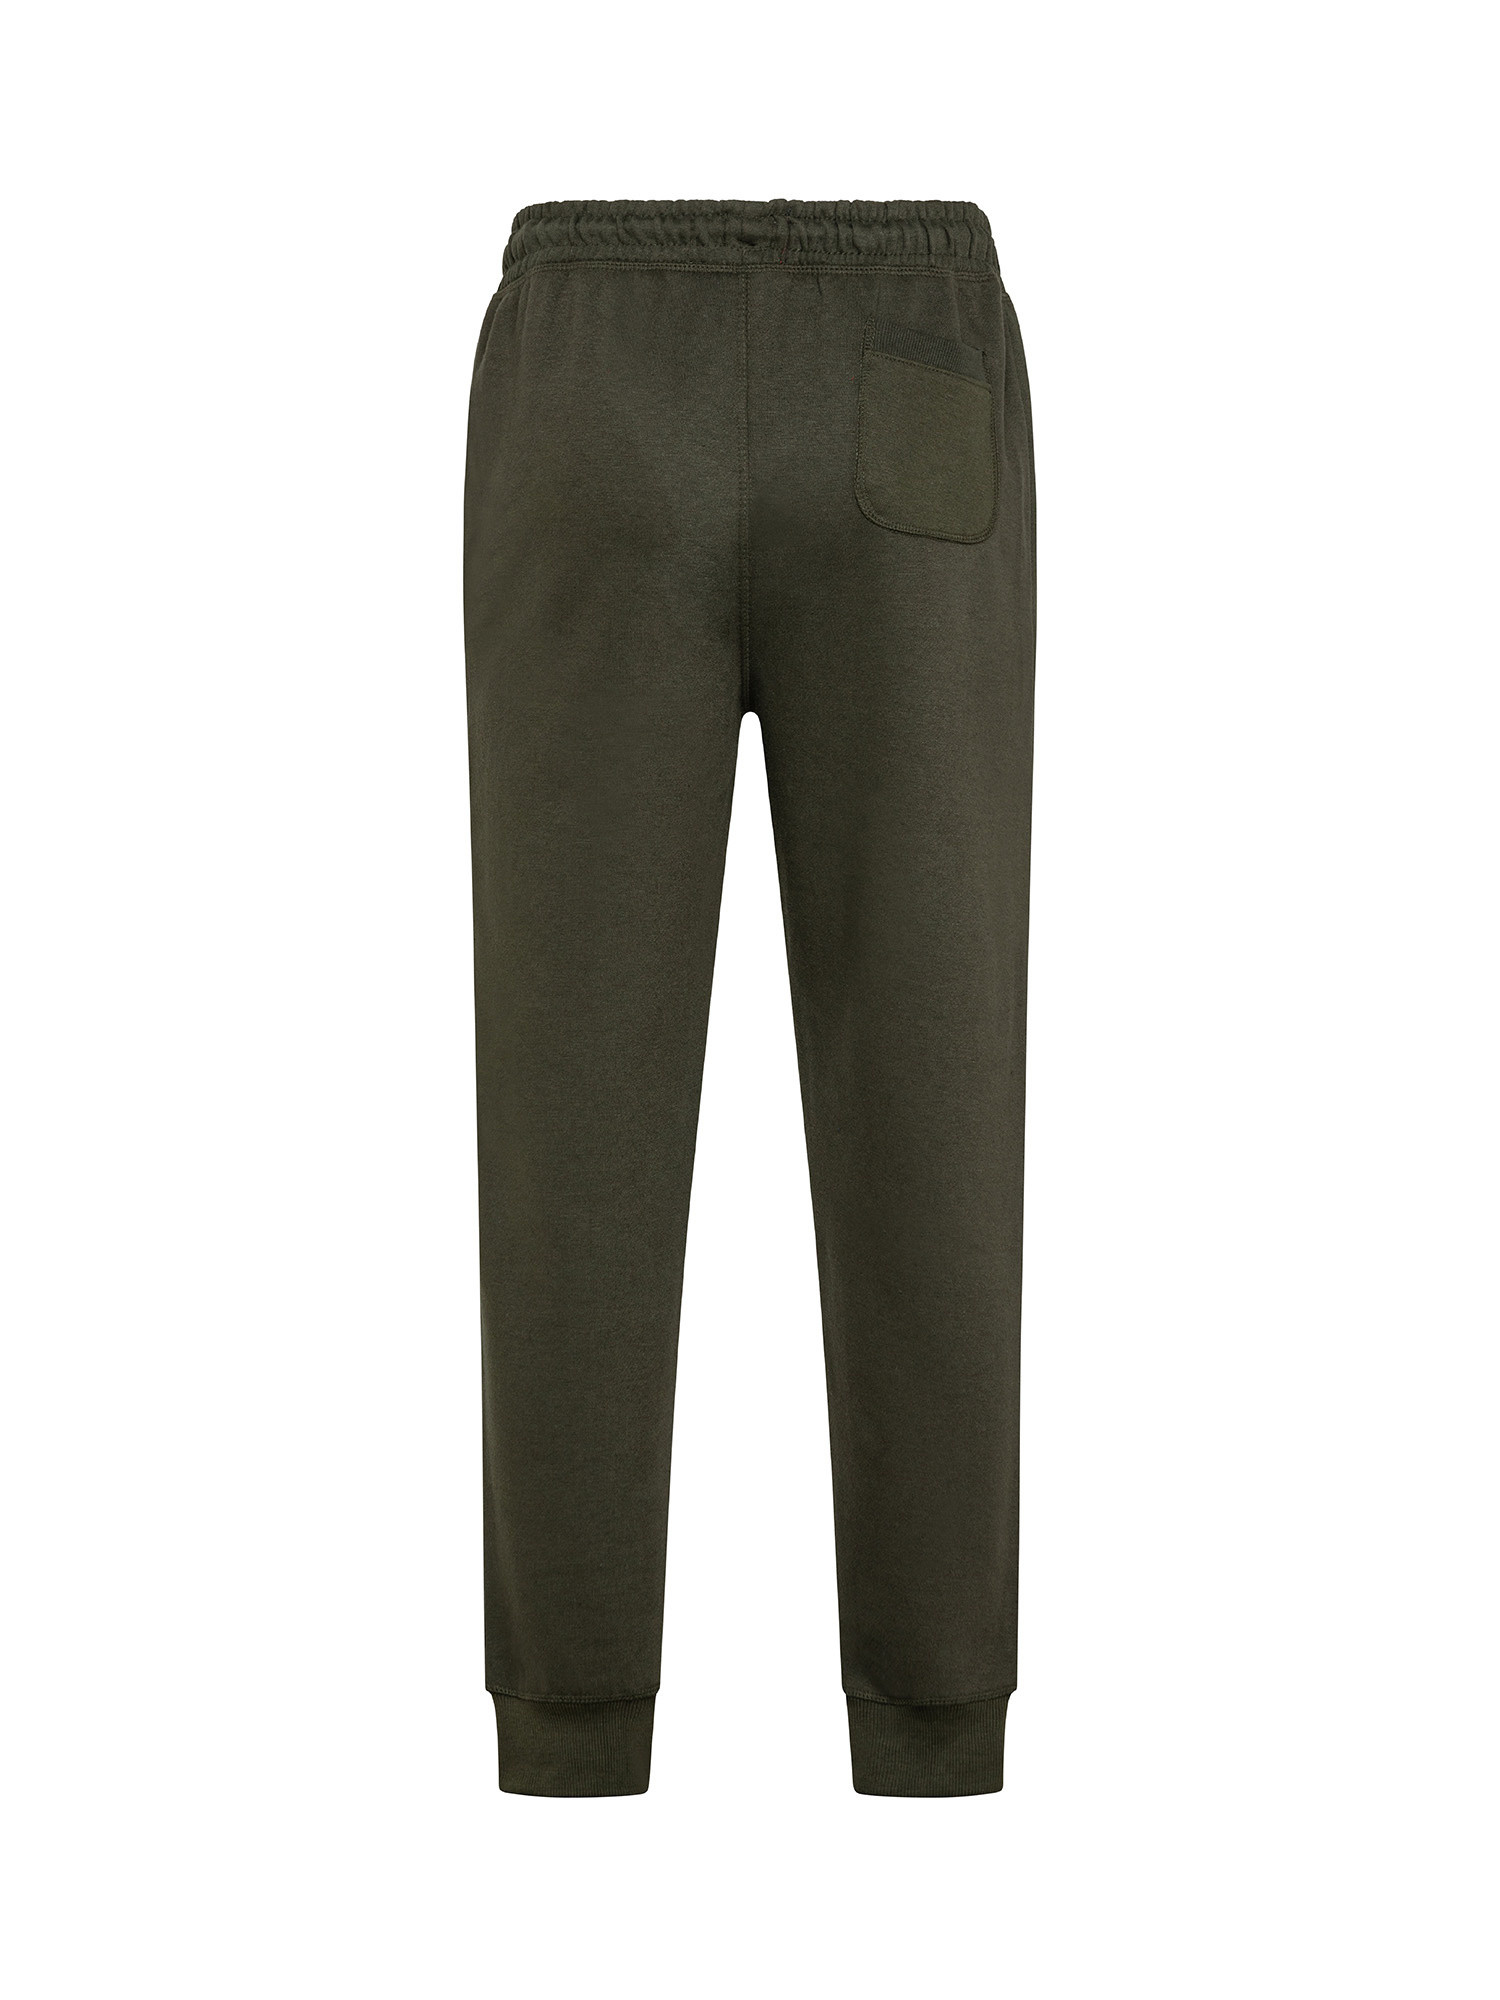 JCT - Trousers with print, Green, large image number 1